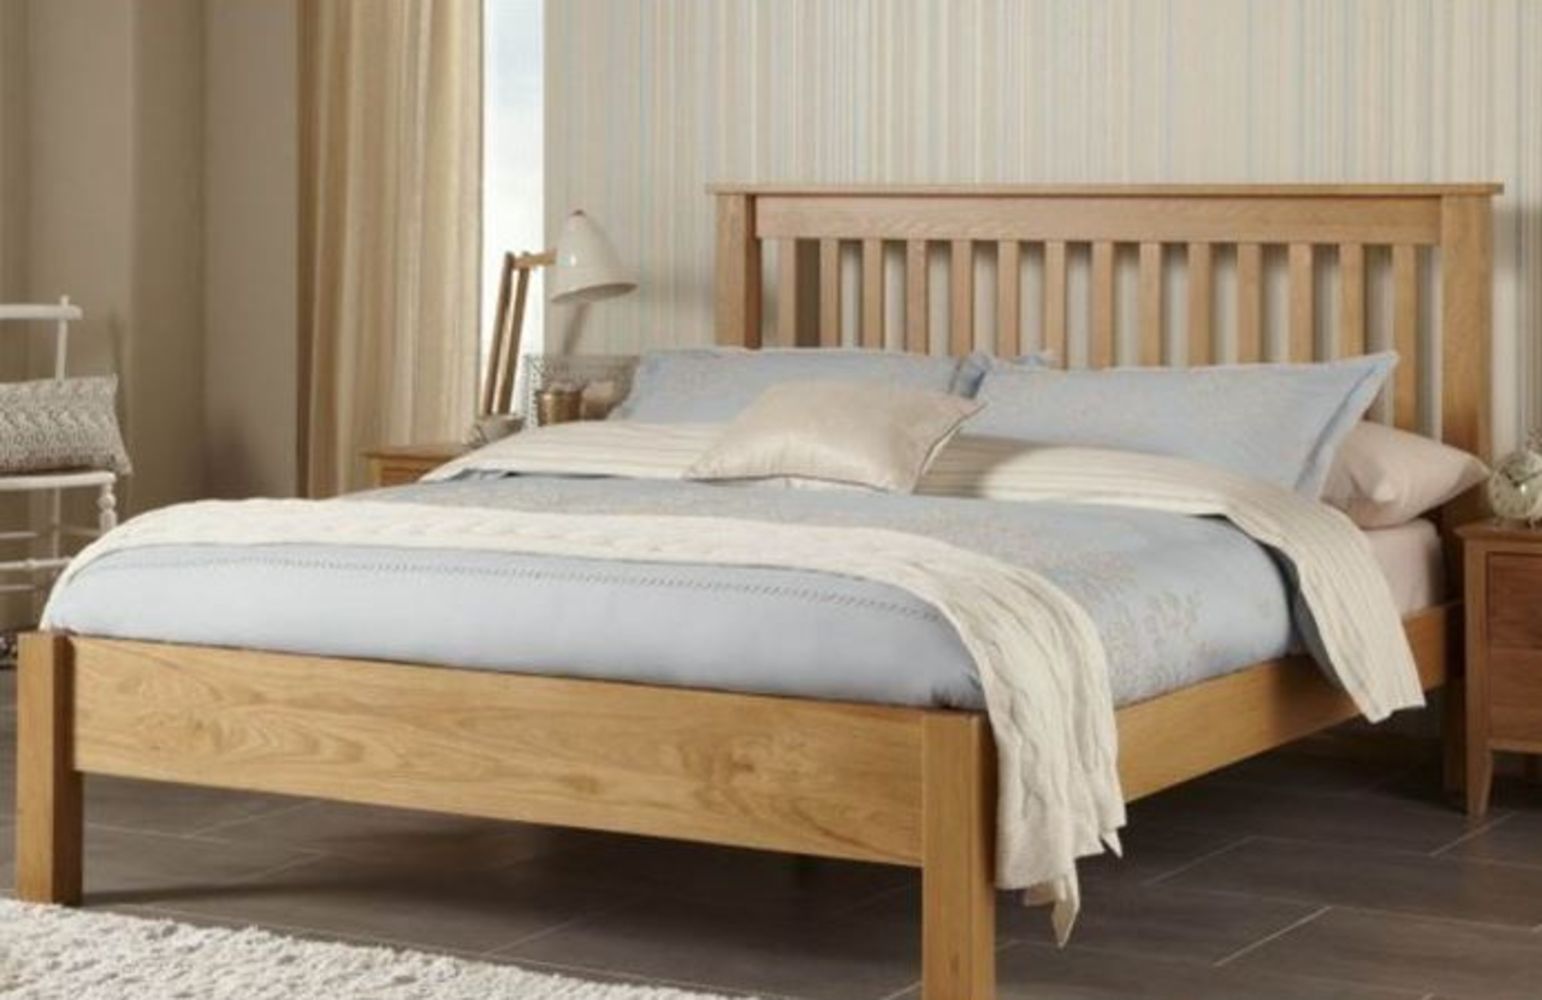 Solid oak beds and mattresses available at fantastic prices ! All brand new, boxed stock